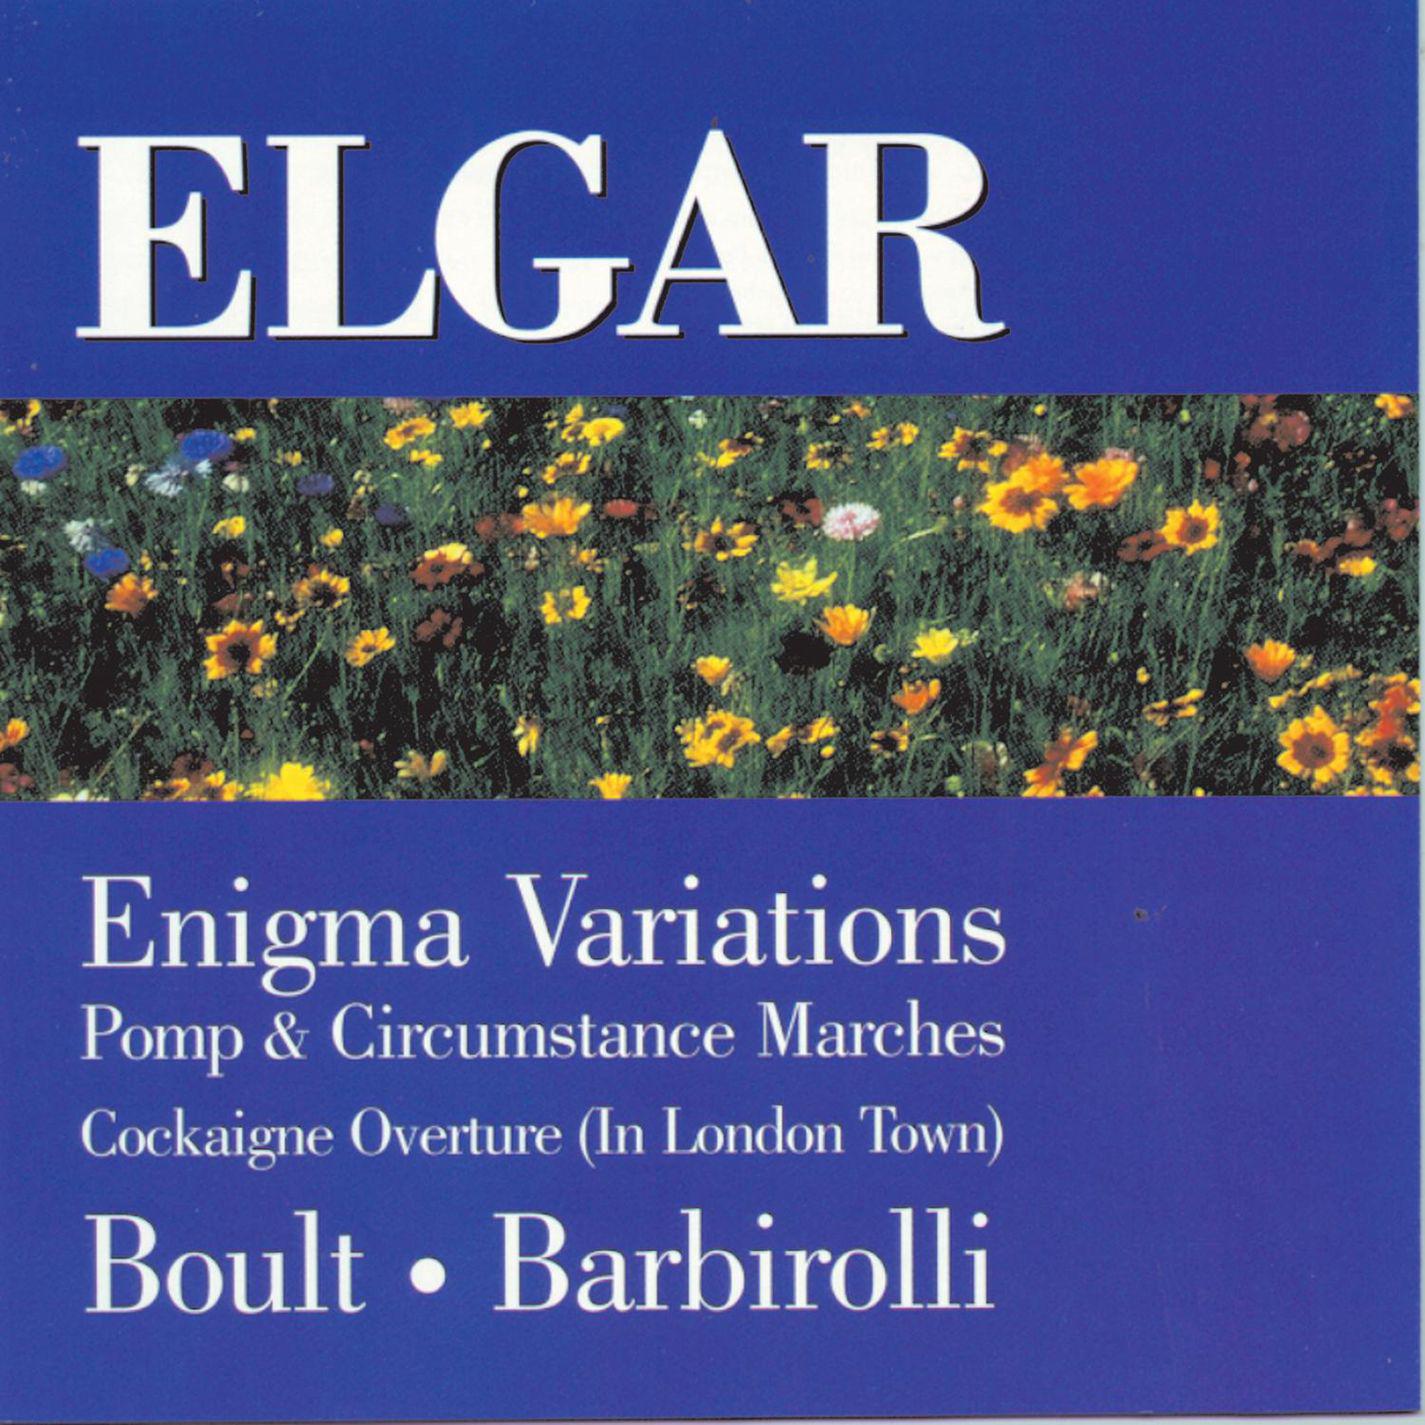 Variations on an Original Theme, Op. 36 "Enigma":Variation II. H.D.S-P.